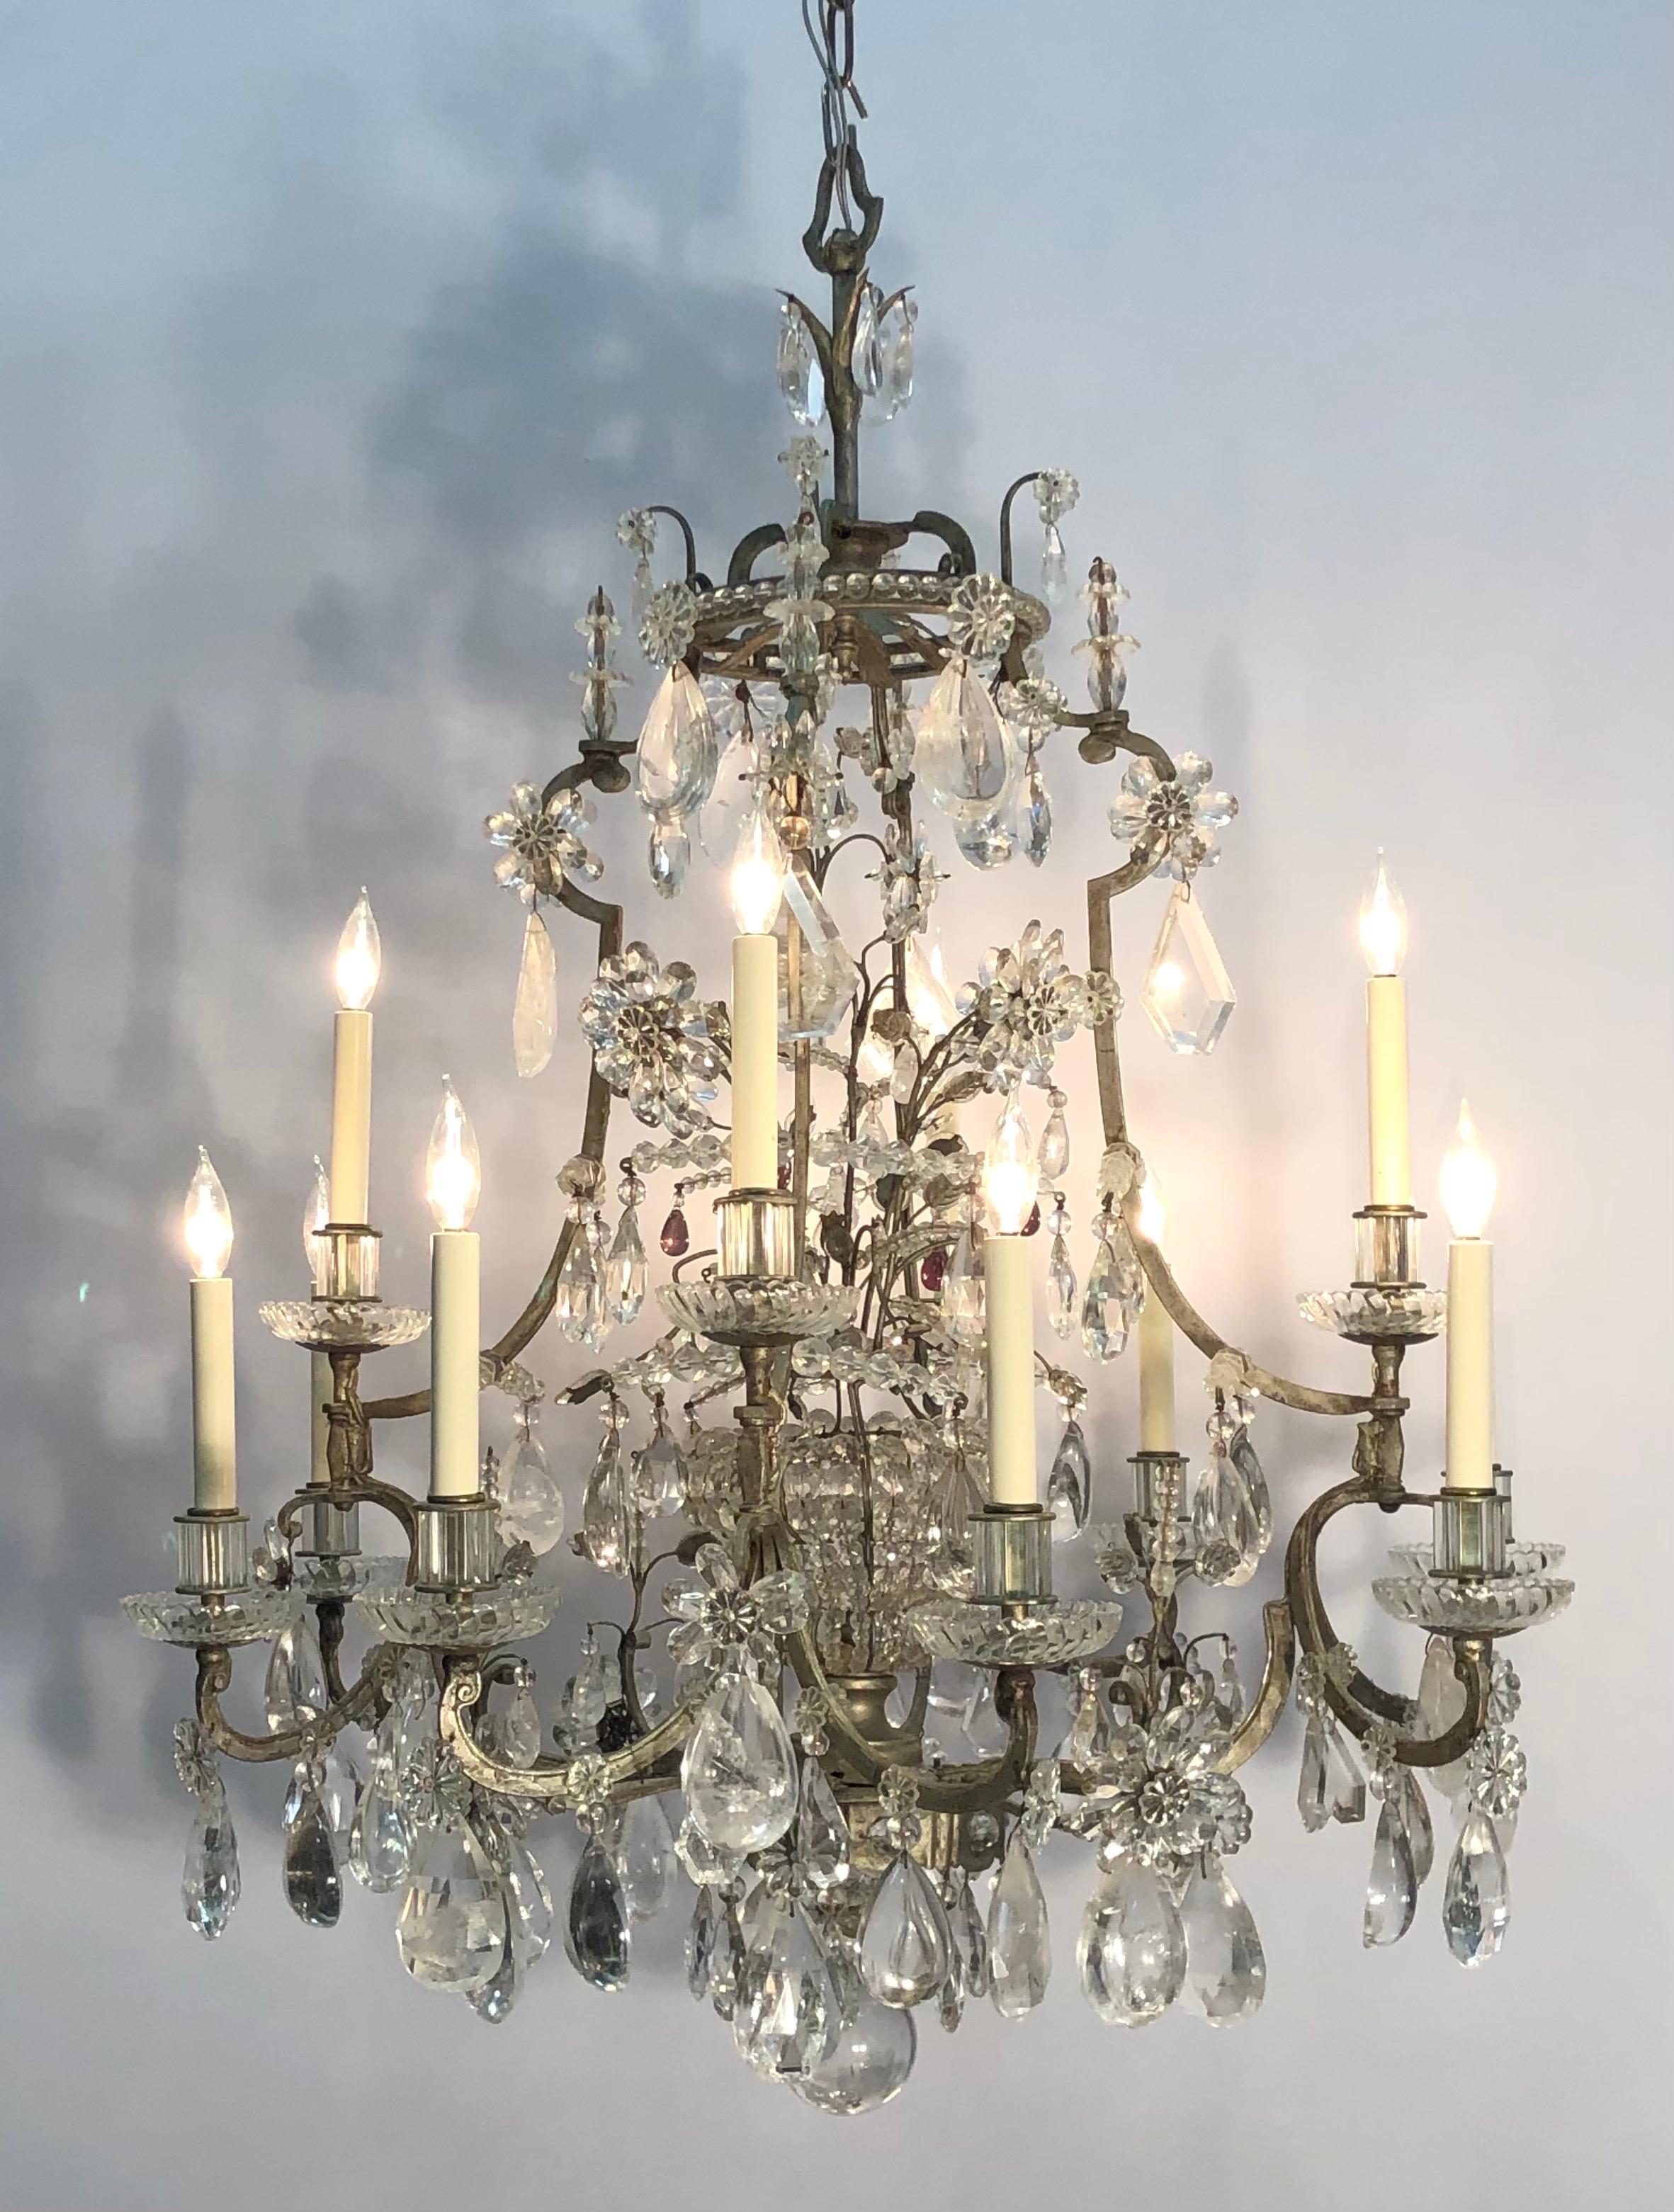 This Grand Maison Baguès silverleaf wrought iron rock crystal chandelier with twelve lights was hand assembled using traditional techniques. The Fashionable Baguès chandelier has a silverleaf wrought iron frame in the chinoiserie taste that is